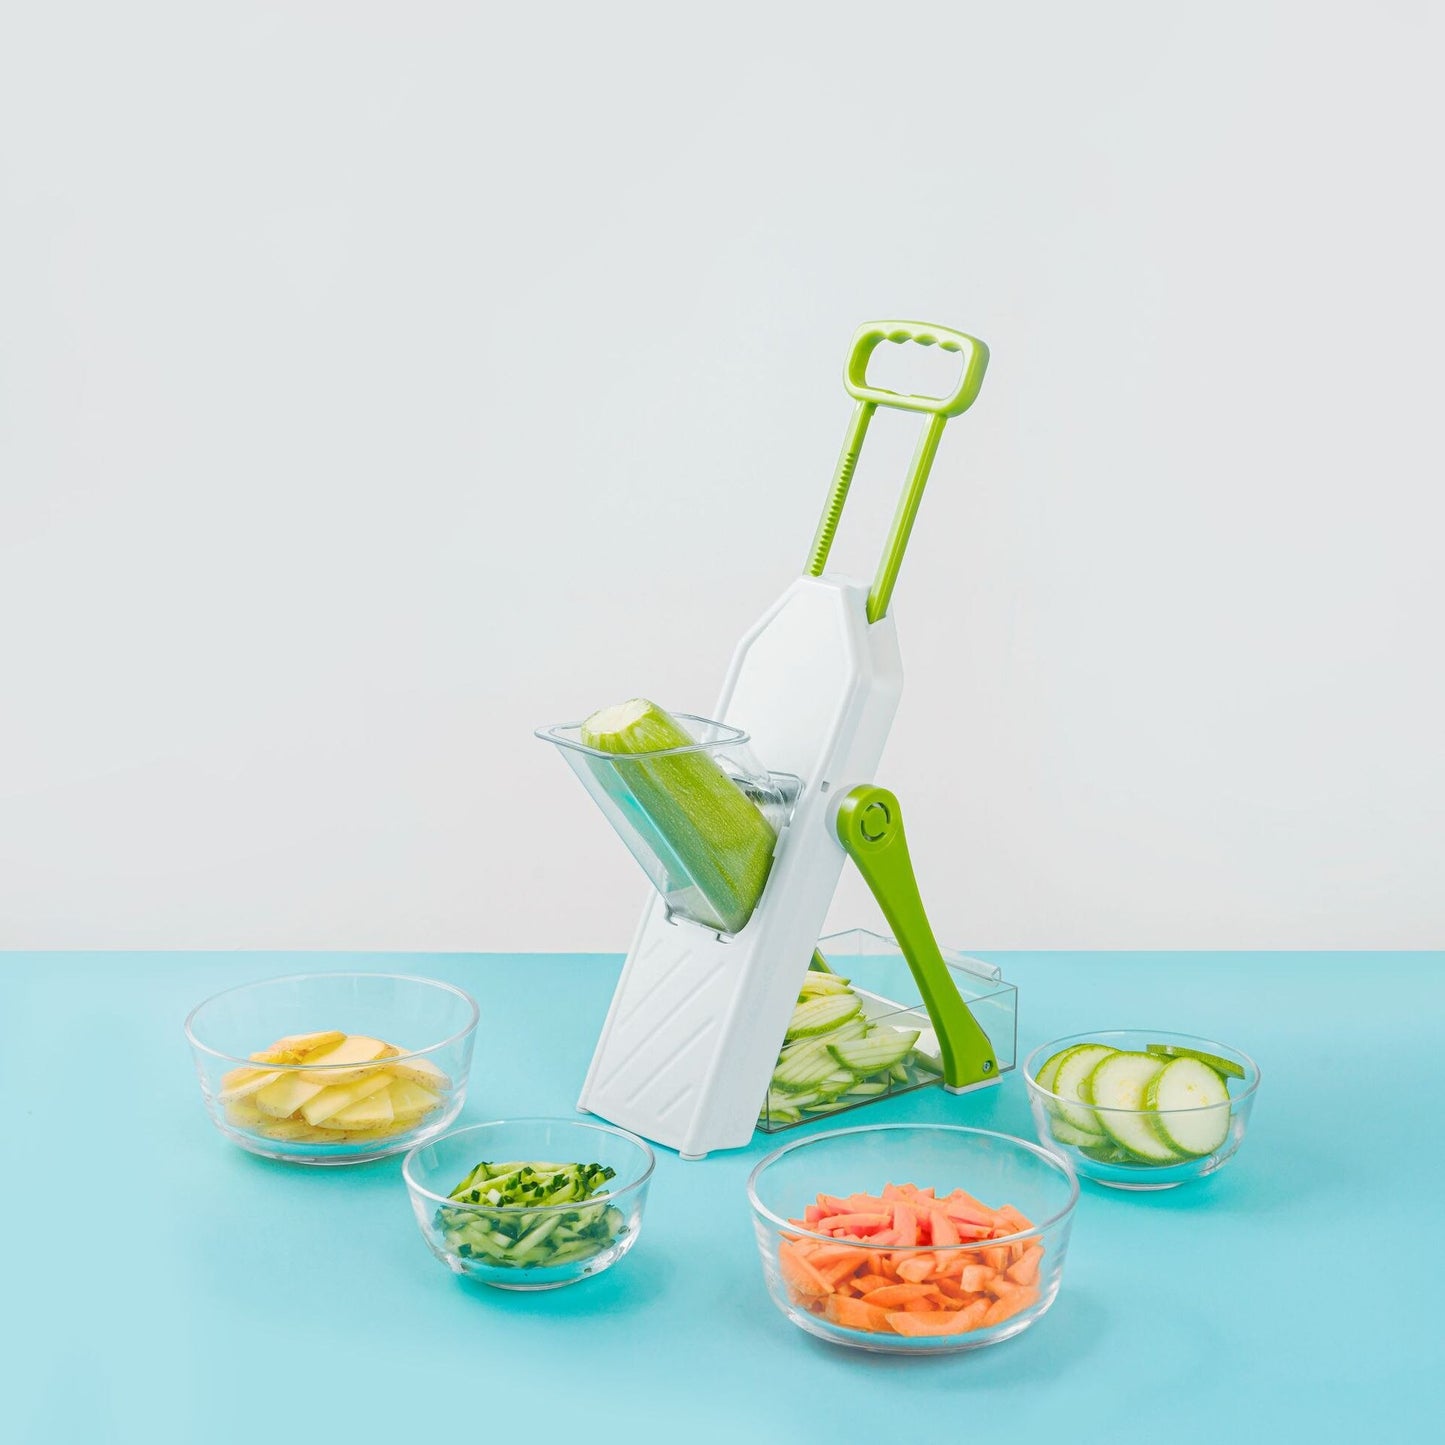 Versatile Vegetable Slicer & Grater - Kitchen Aid for Carrots, Potatoes, French Fries